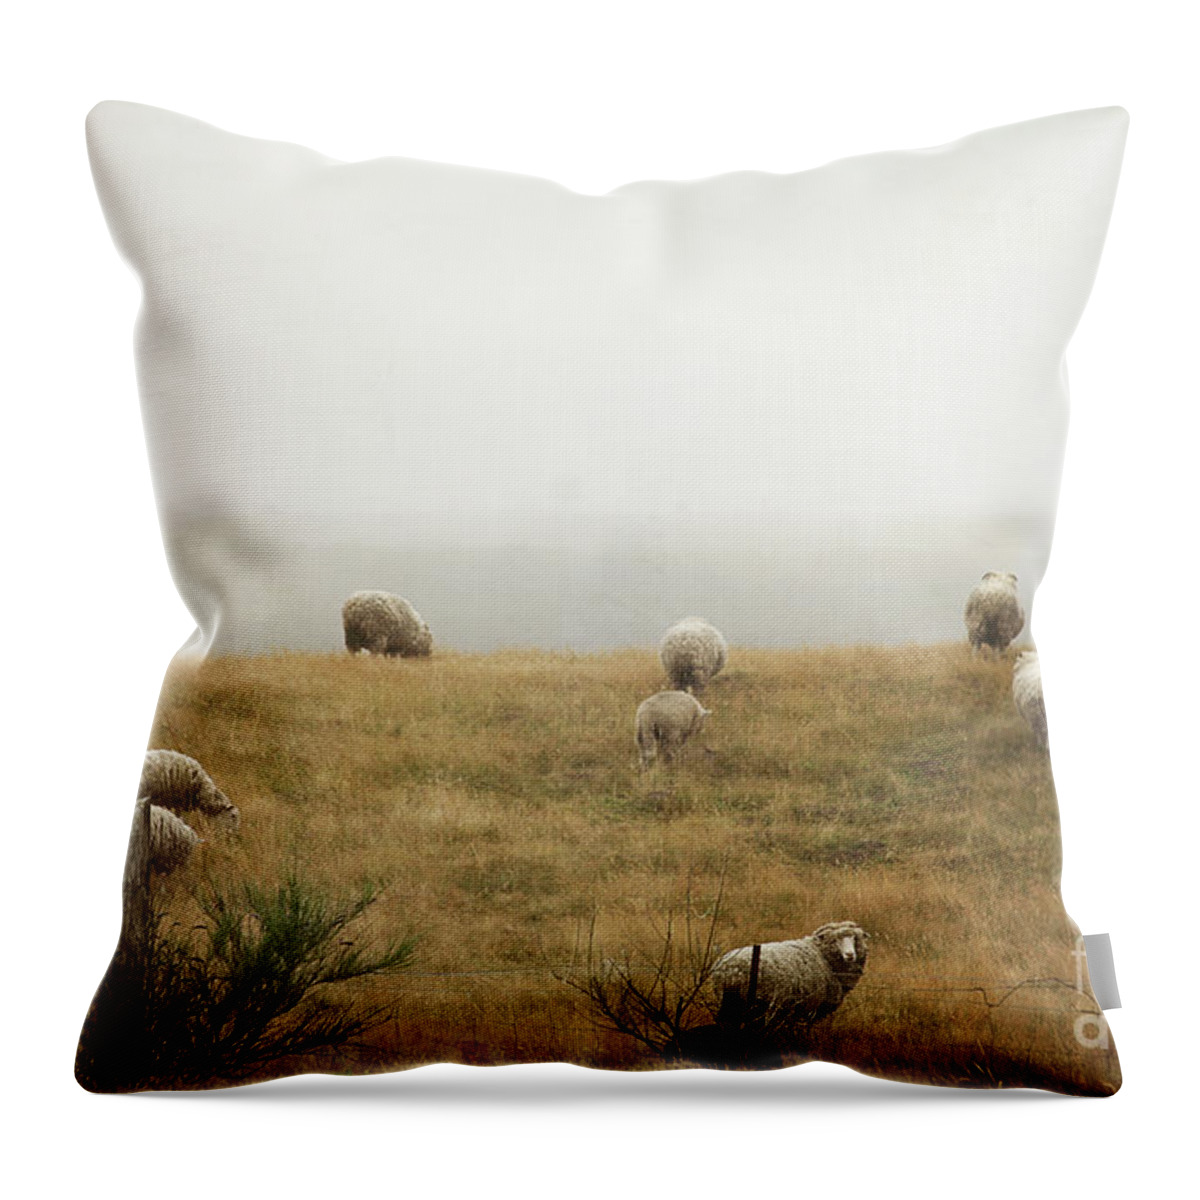 Landscape Throw Pillow featuring the photograph Sheep On A Foggy Morning by Sylvia Cook